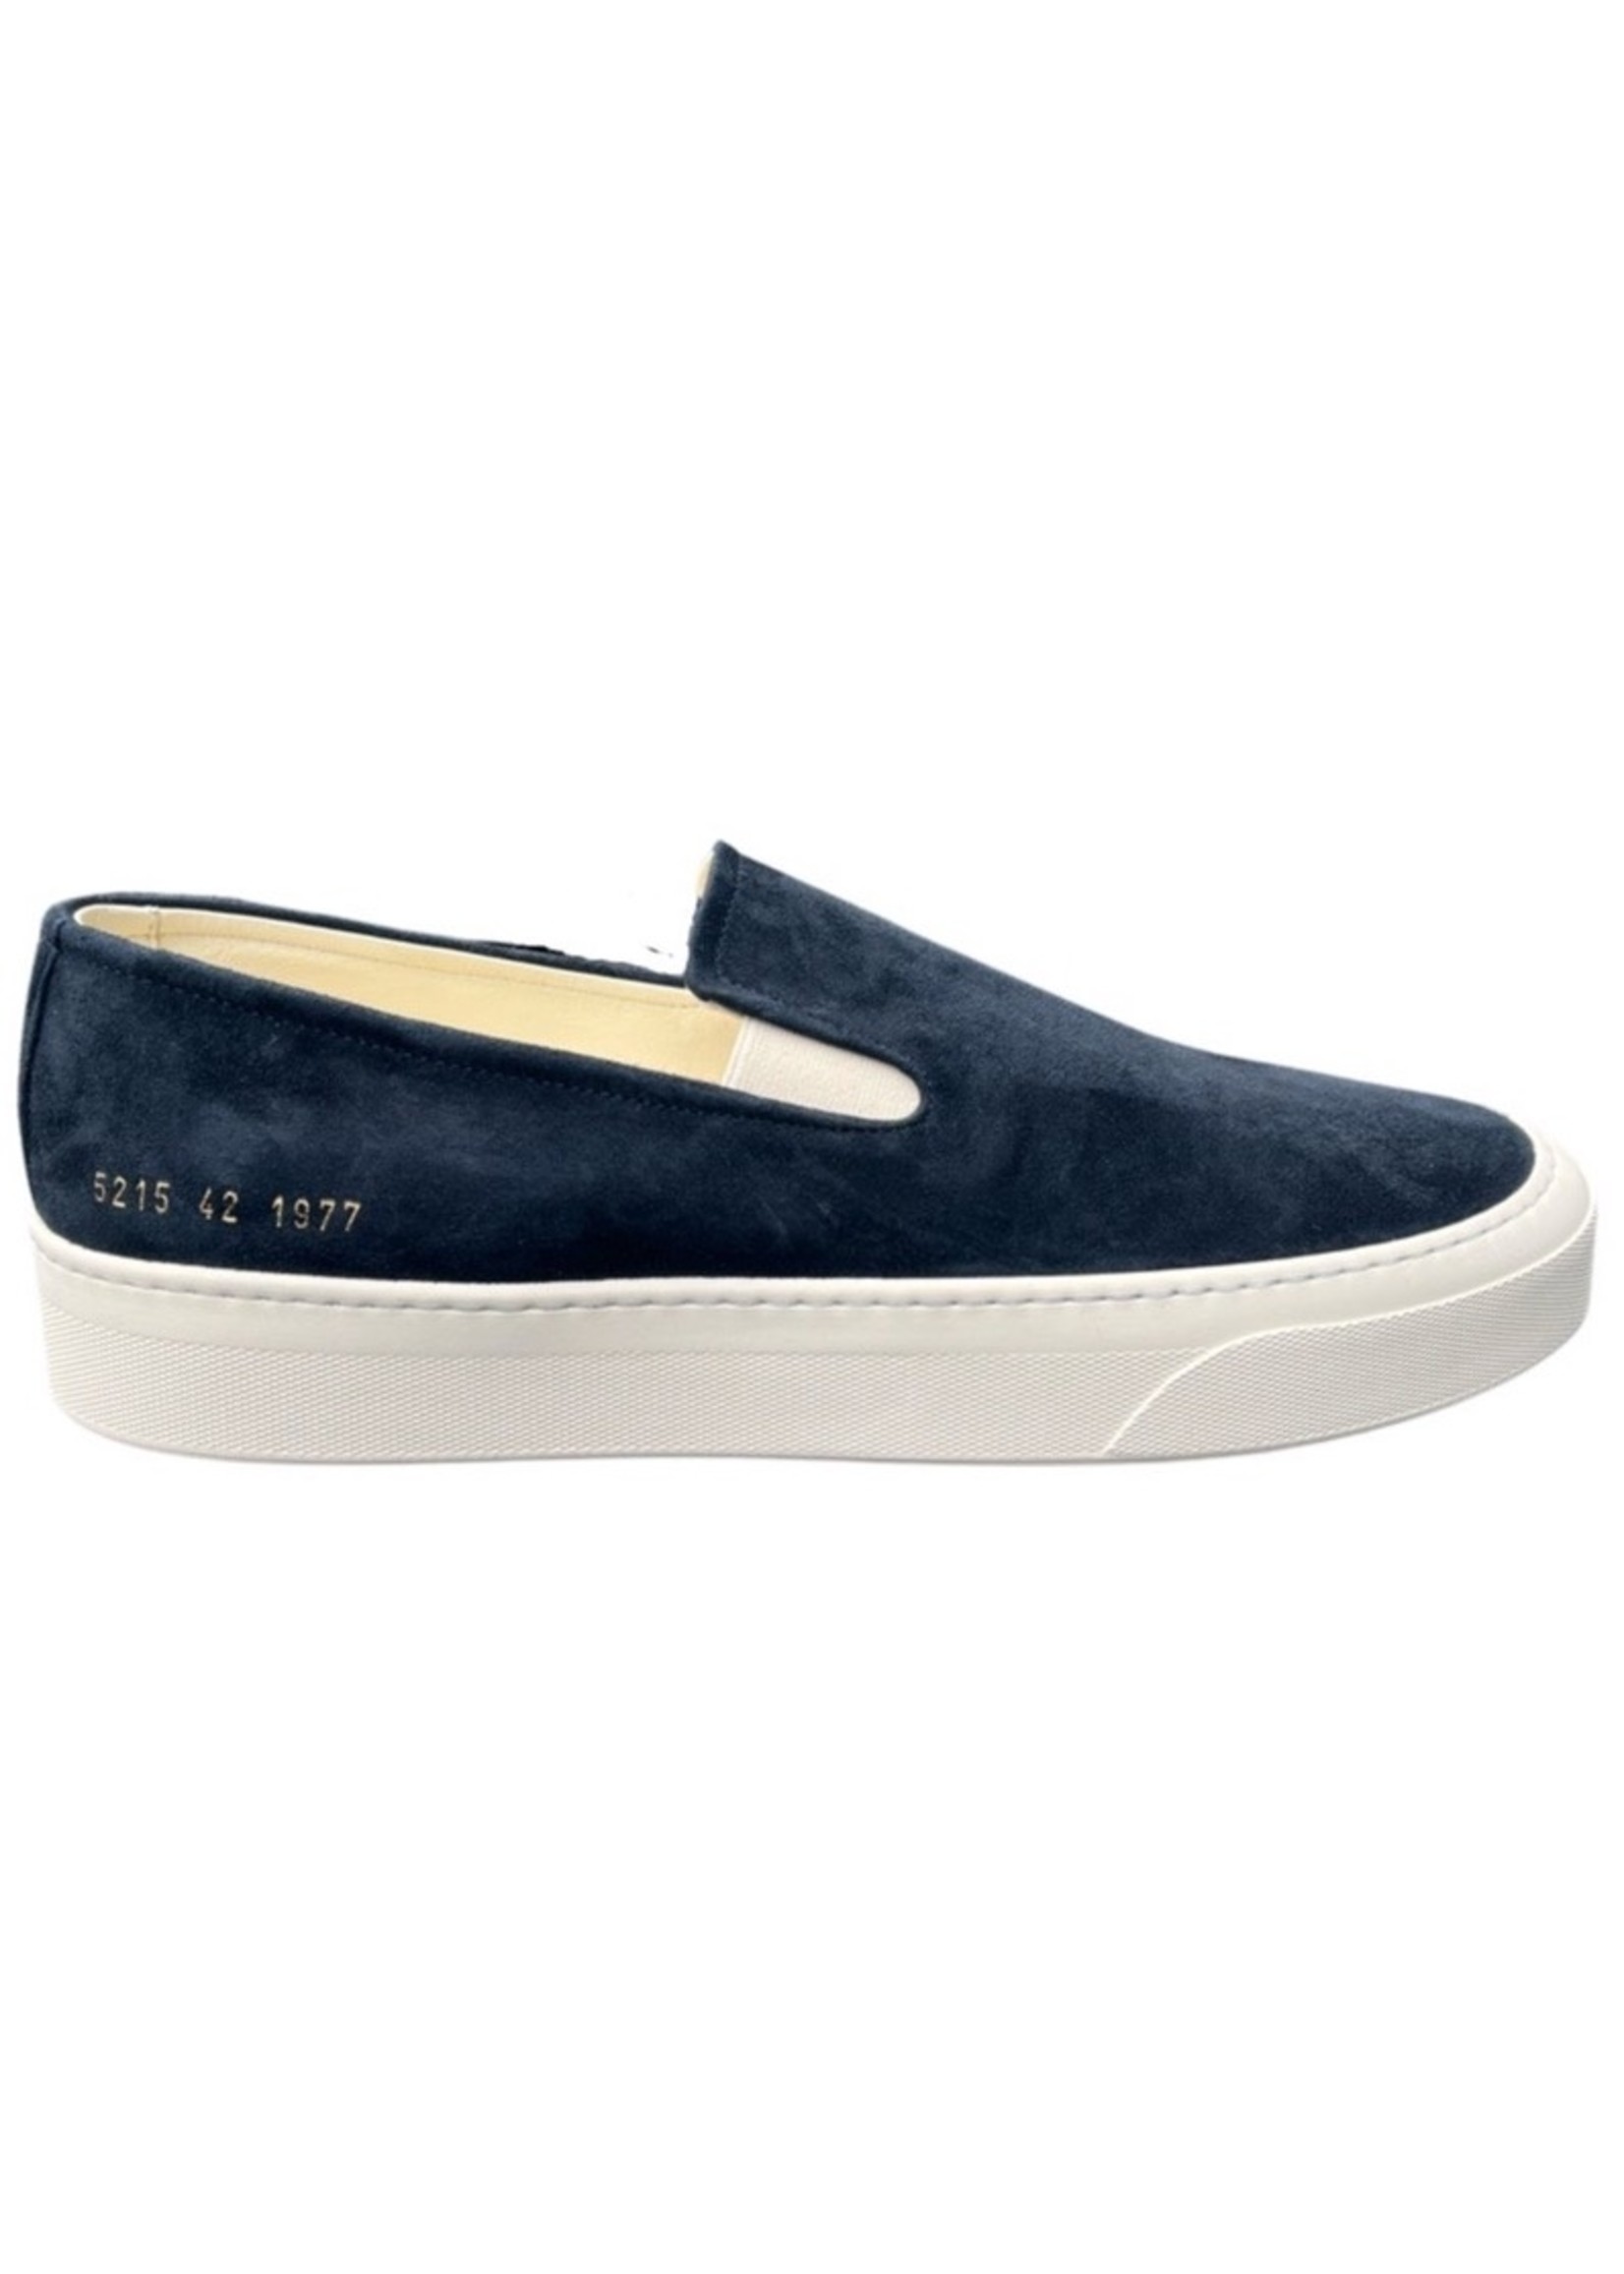 COMMON PROJECTS SUEDE SLIP ON SNEAKER